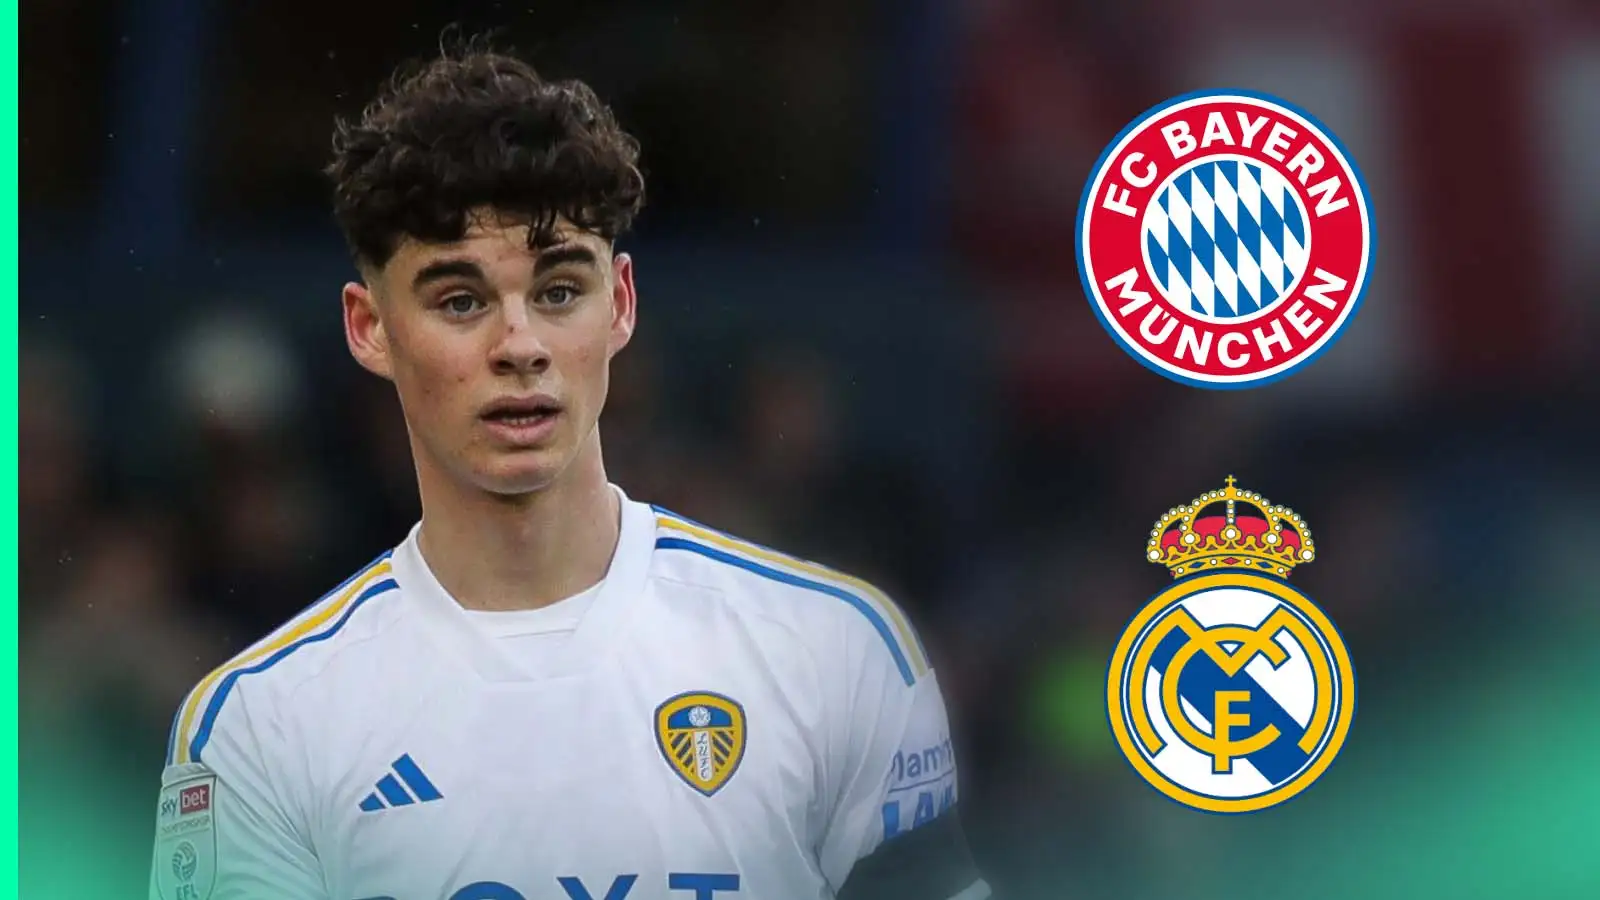 Real Madrid and Bayern Munich join race to sign Leeds United star as details of scouting mission emerge